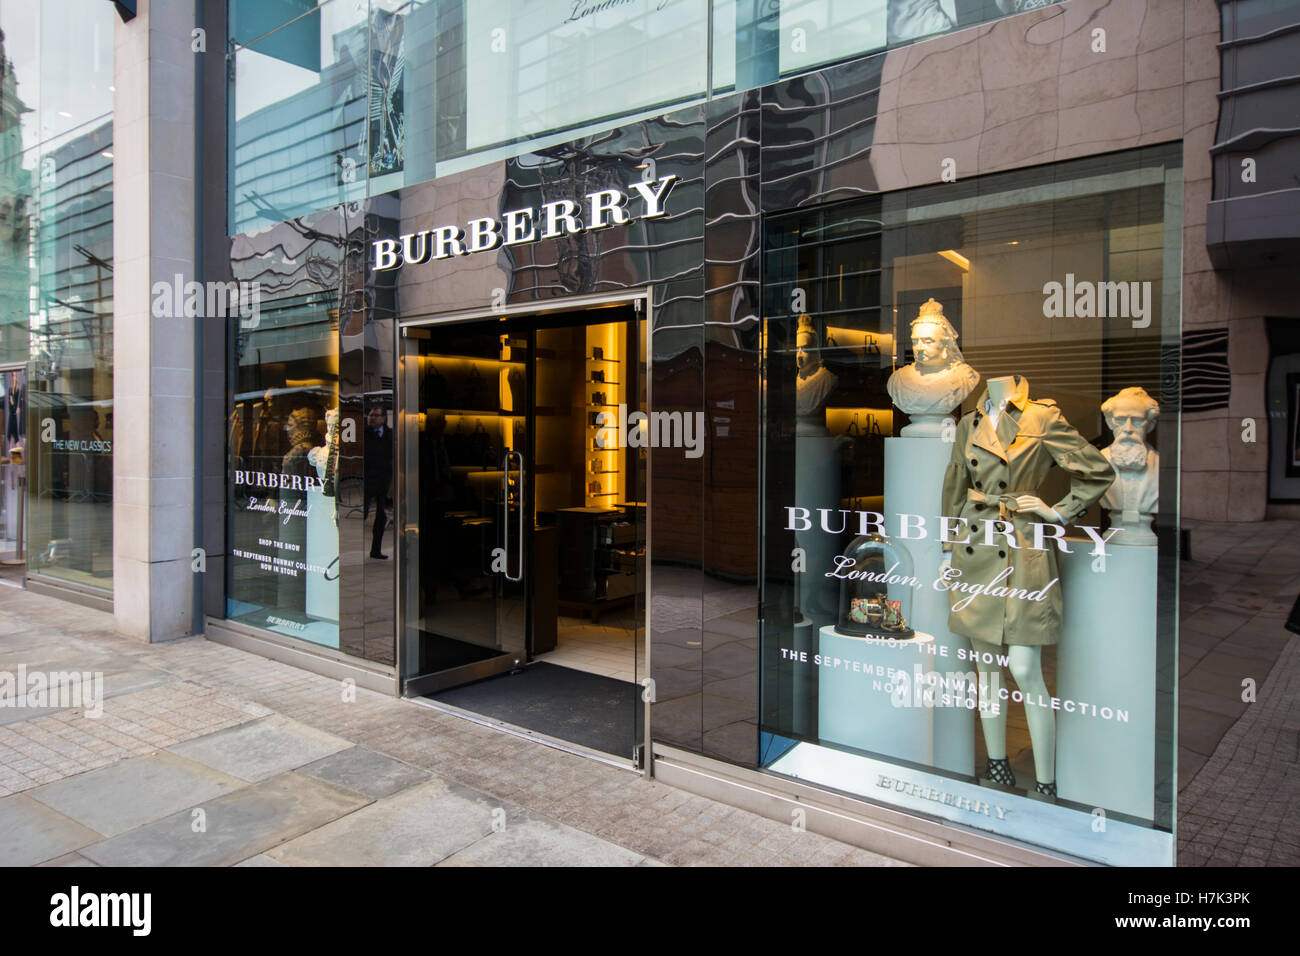 Burberry fashion shop in Manchester. Stock Photo